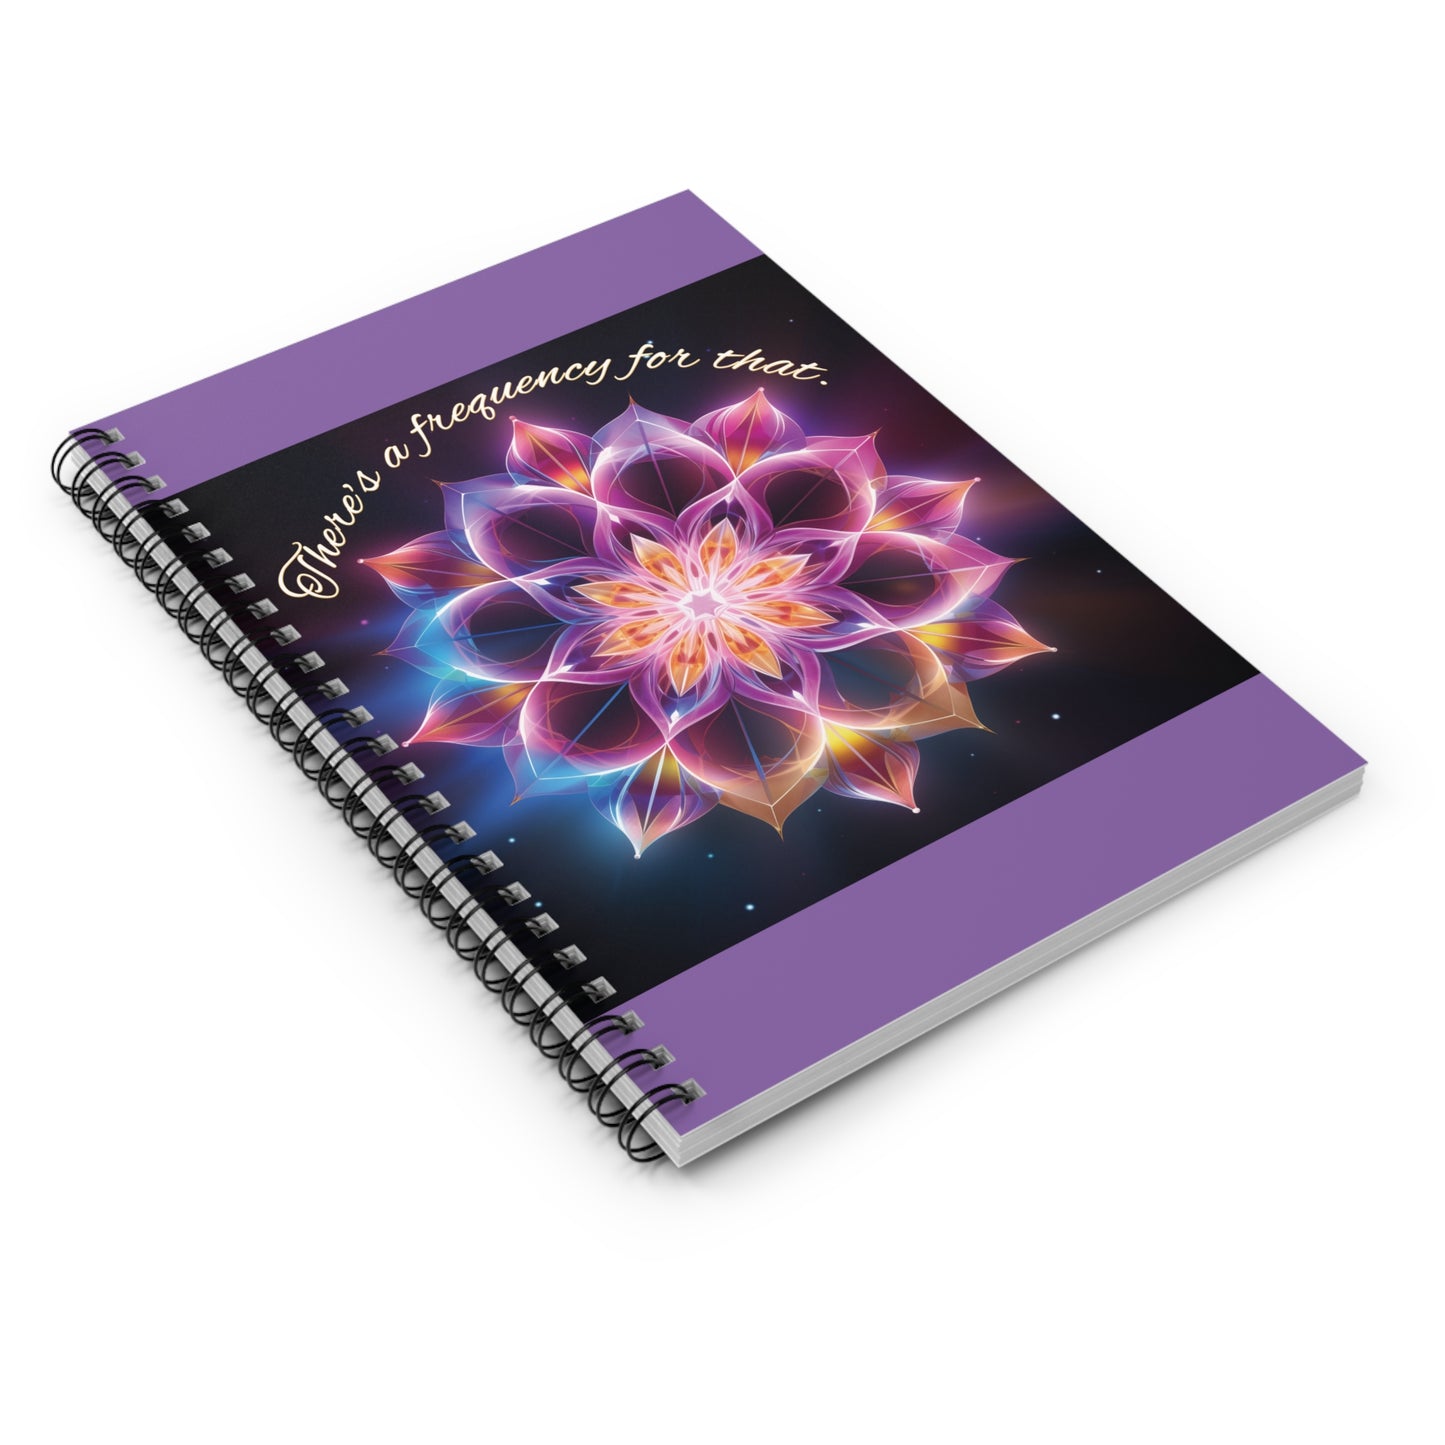 Healing Waves Frequency Spiral Notebook - Ruled Line - Purple